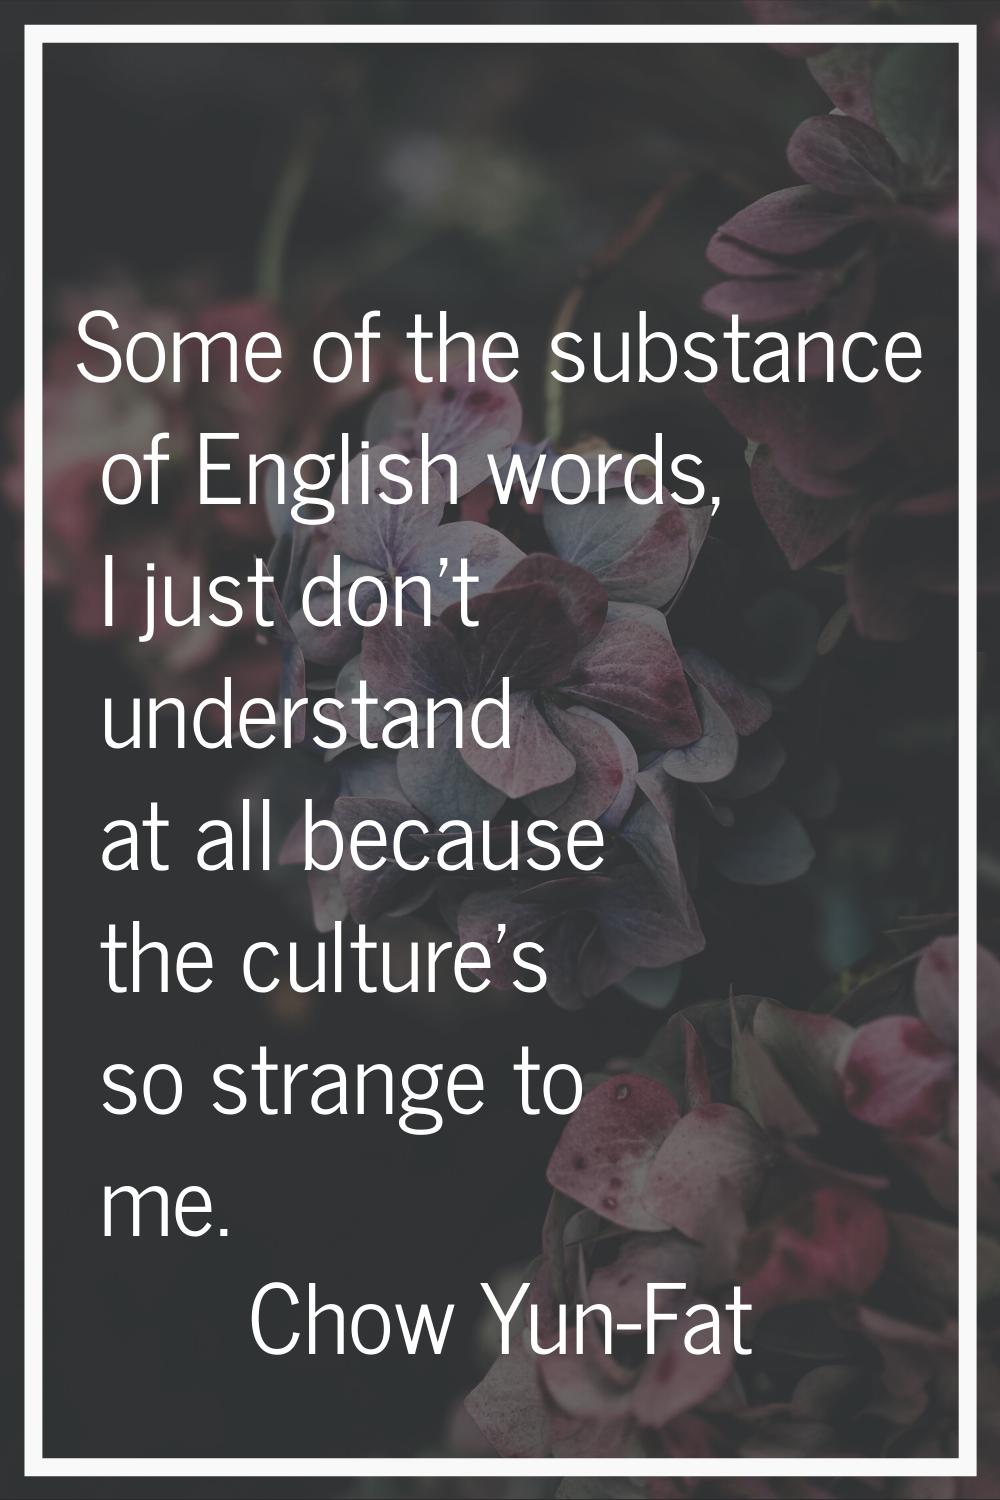 Some of the substance of English words, I just don't understand at all because the culture's so str